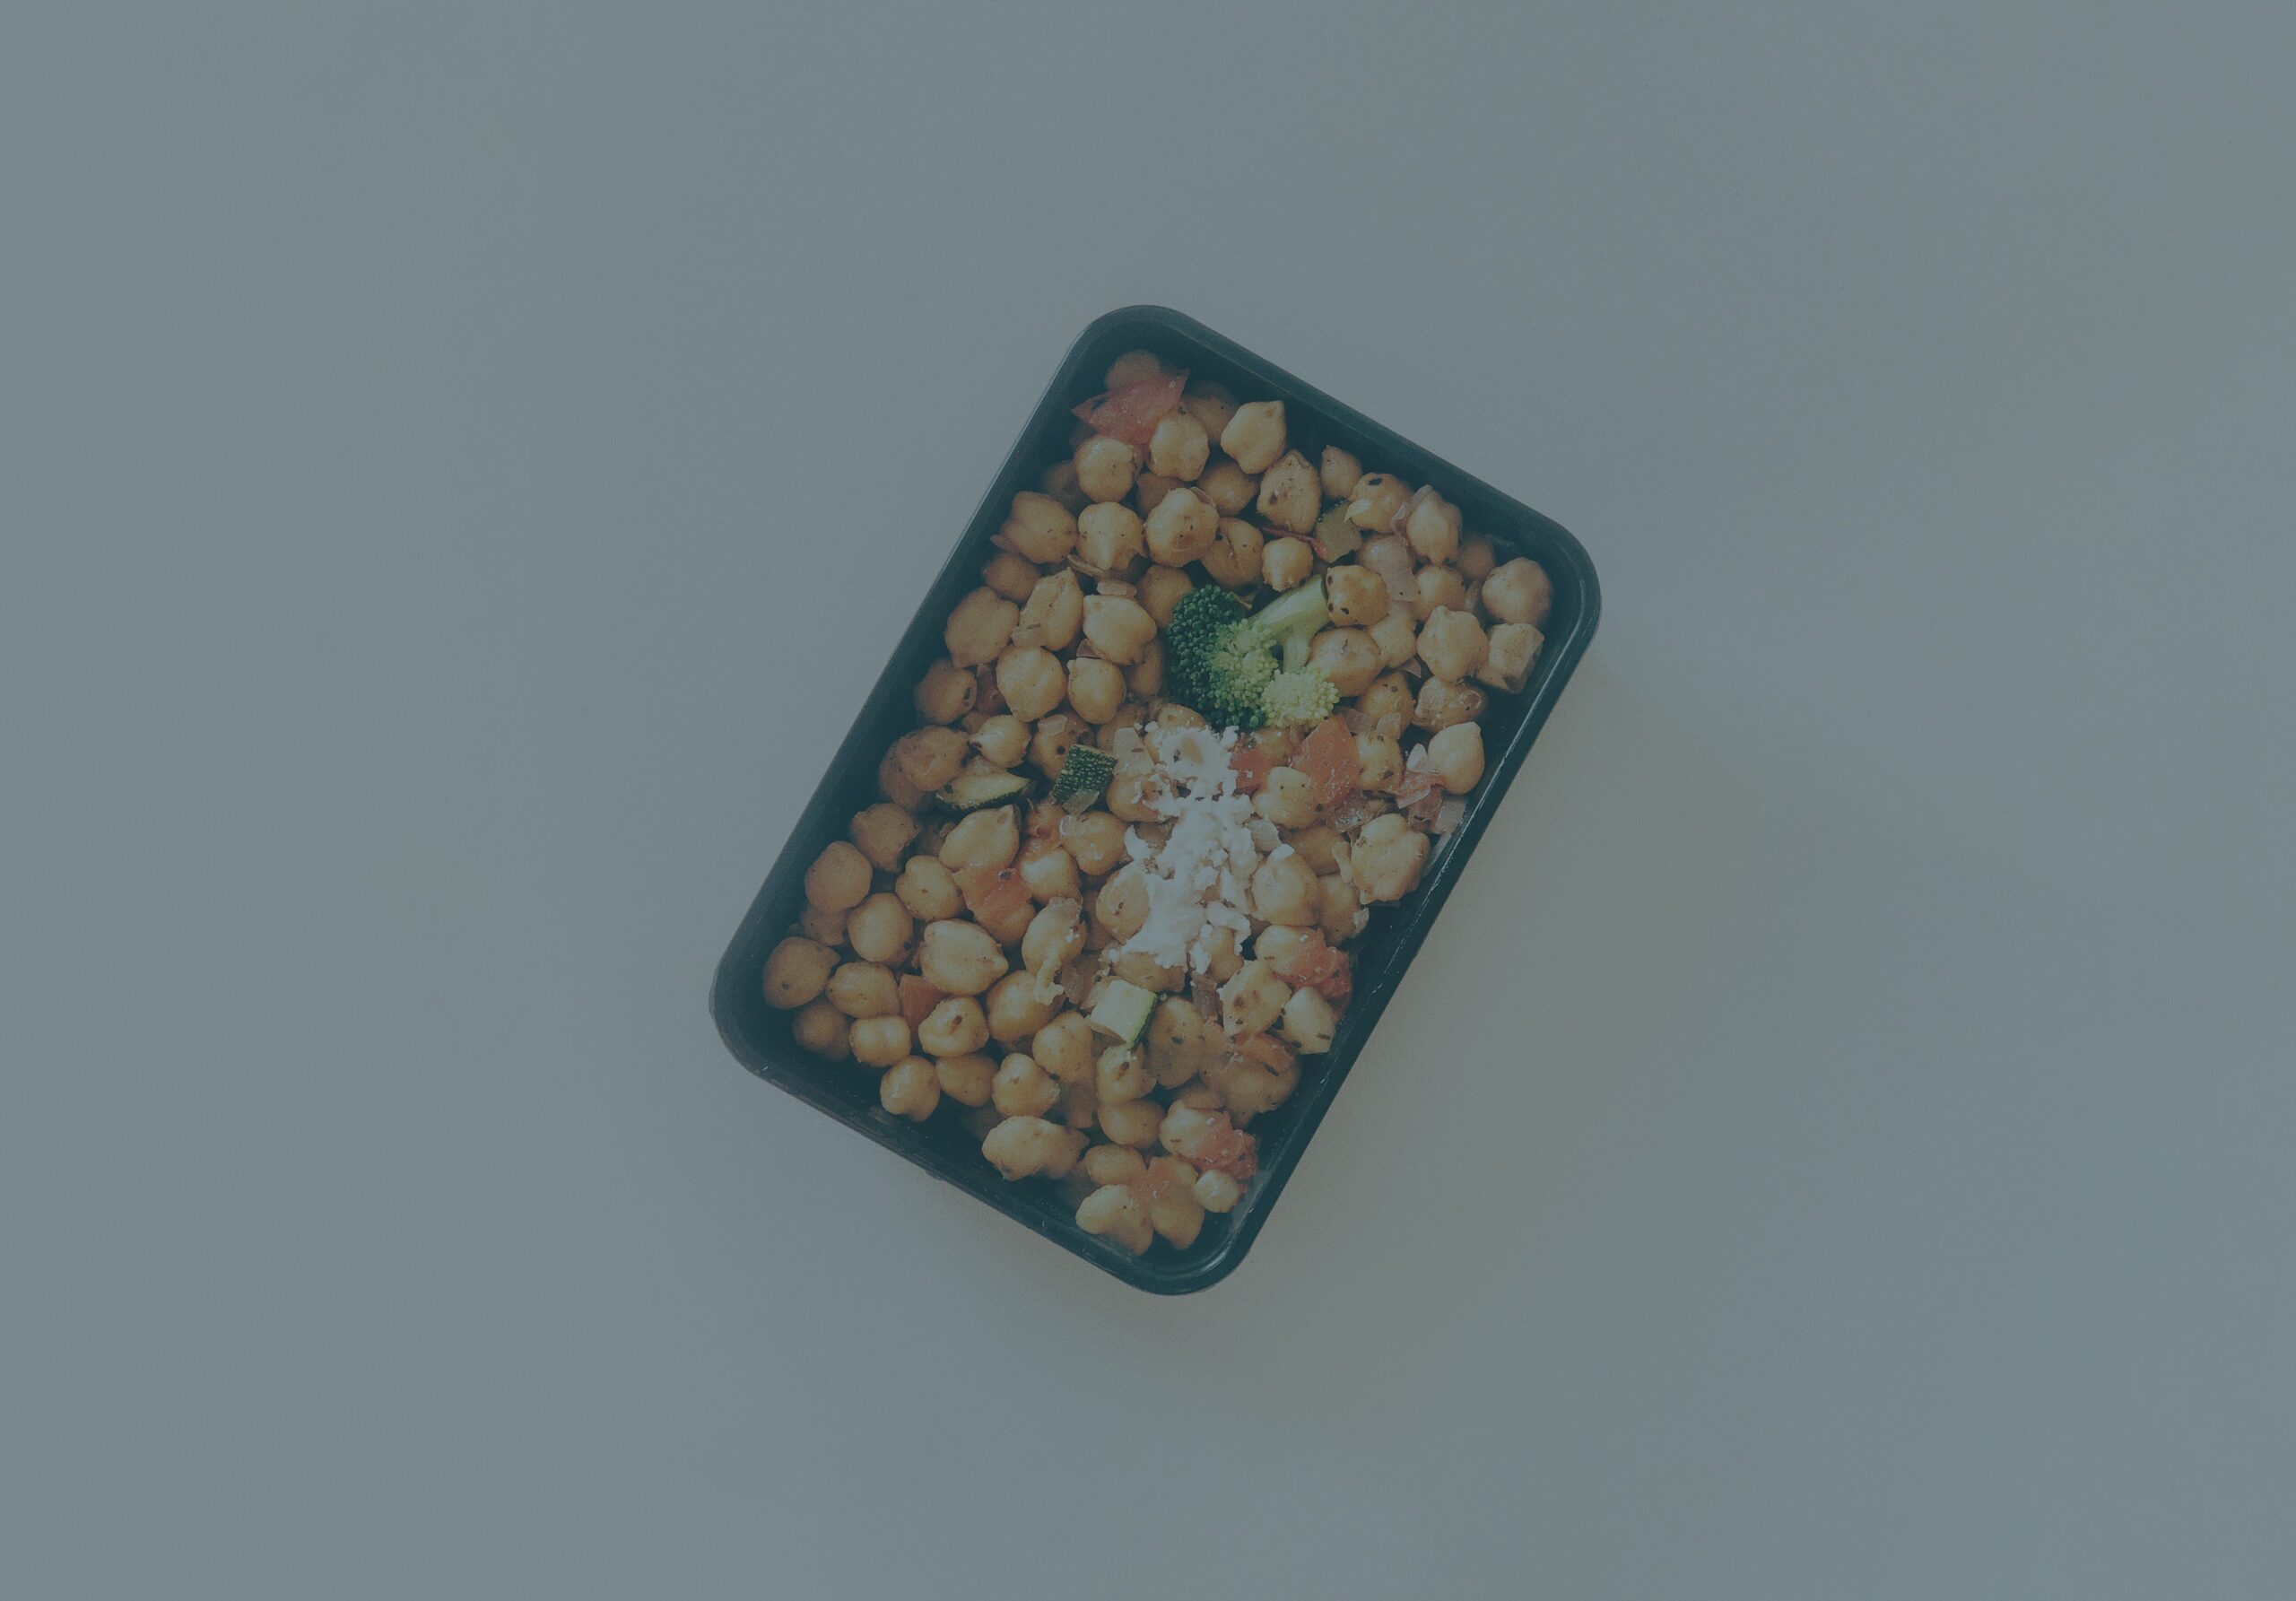 Grayed o9out photo of chickpeas and broccoli in a pan